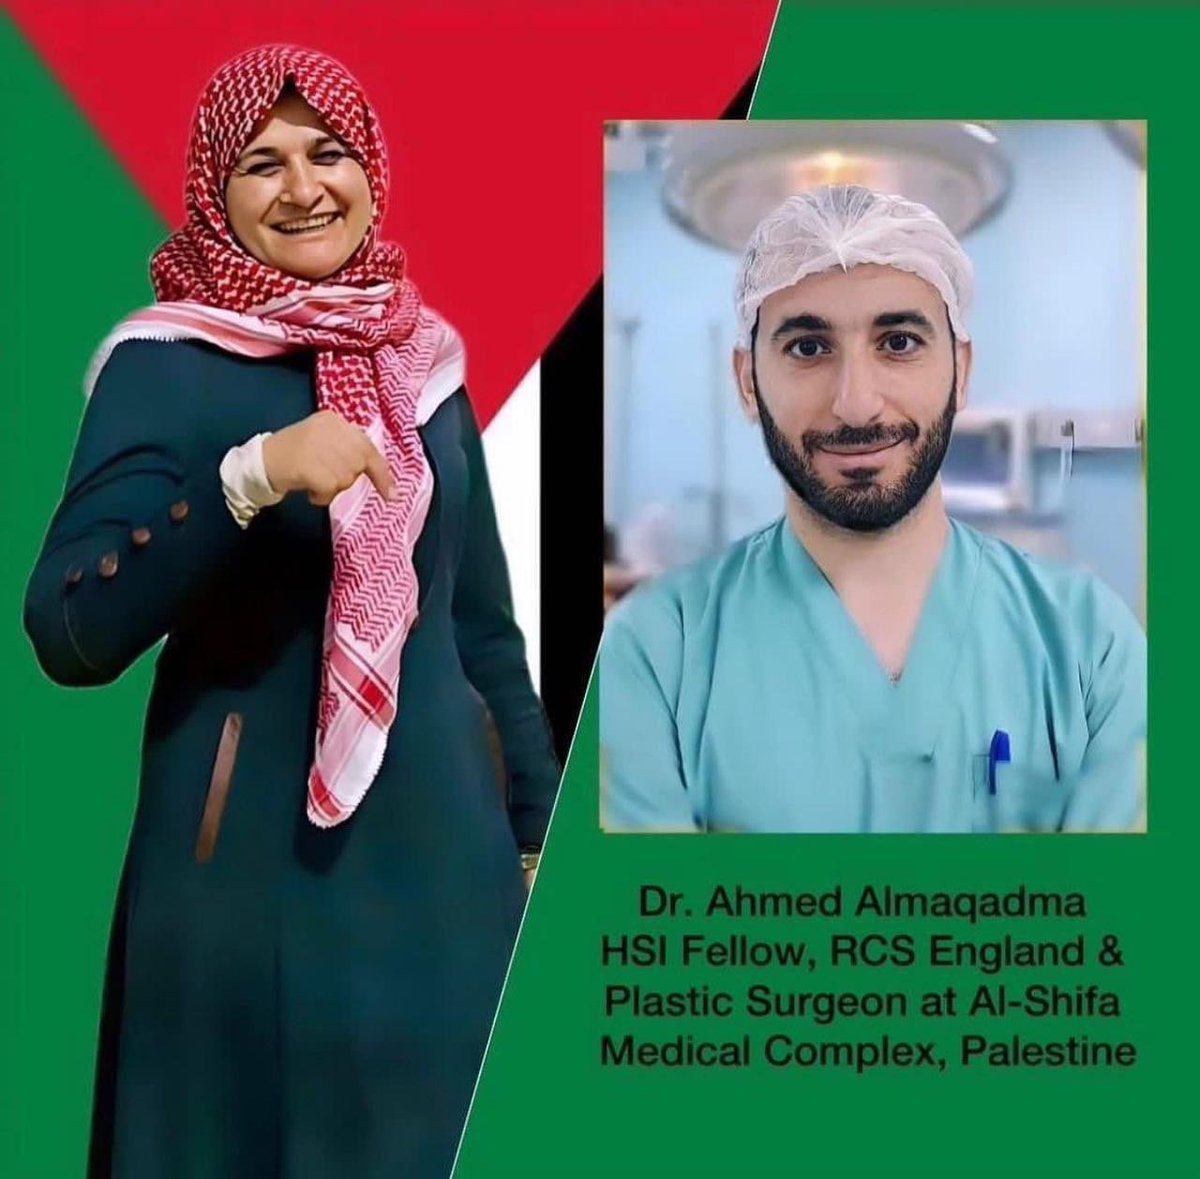 BREAKING: The bodies of medical doctor Yusra Maqadmeh and her son, Ahmed, also a medical doctor, were just found after being executed by the Israeli army in the Al Shifa Medical Complex following pullout of the Israeli troops from the hospital this morning.